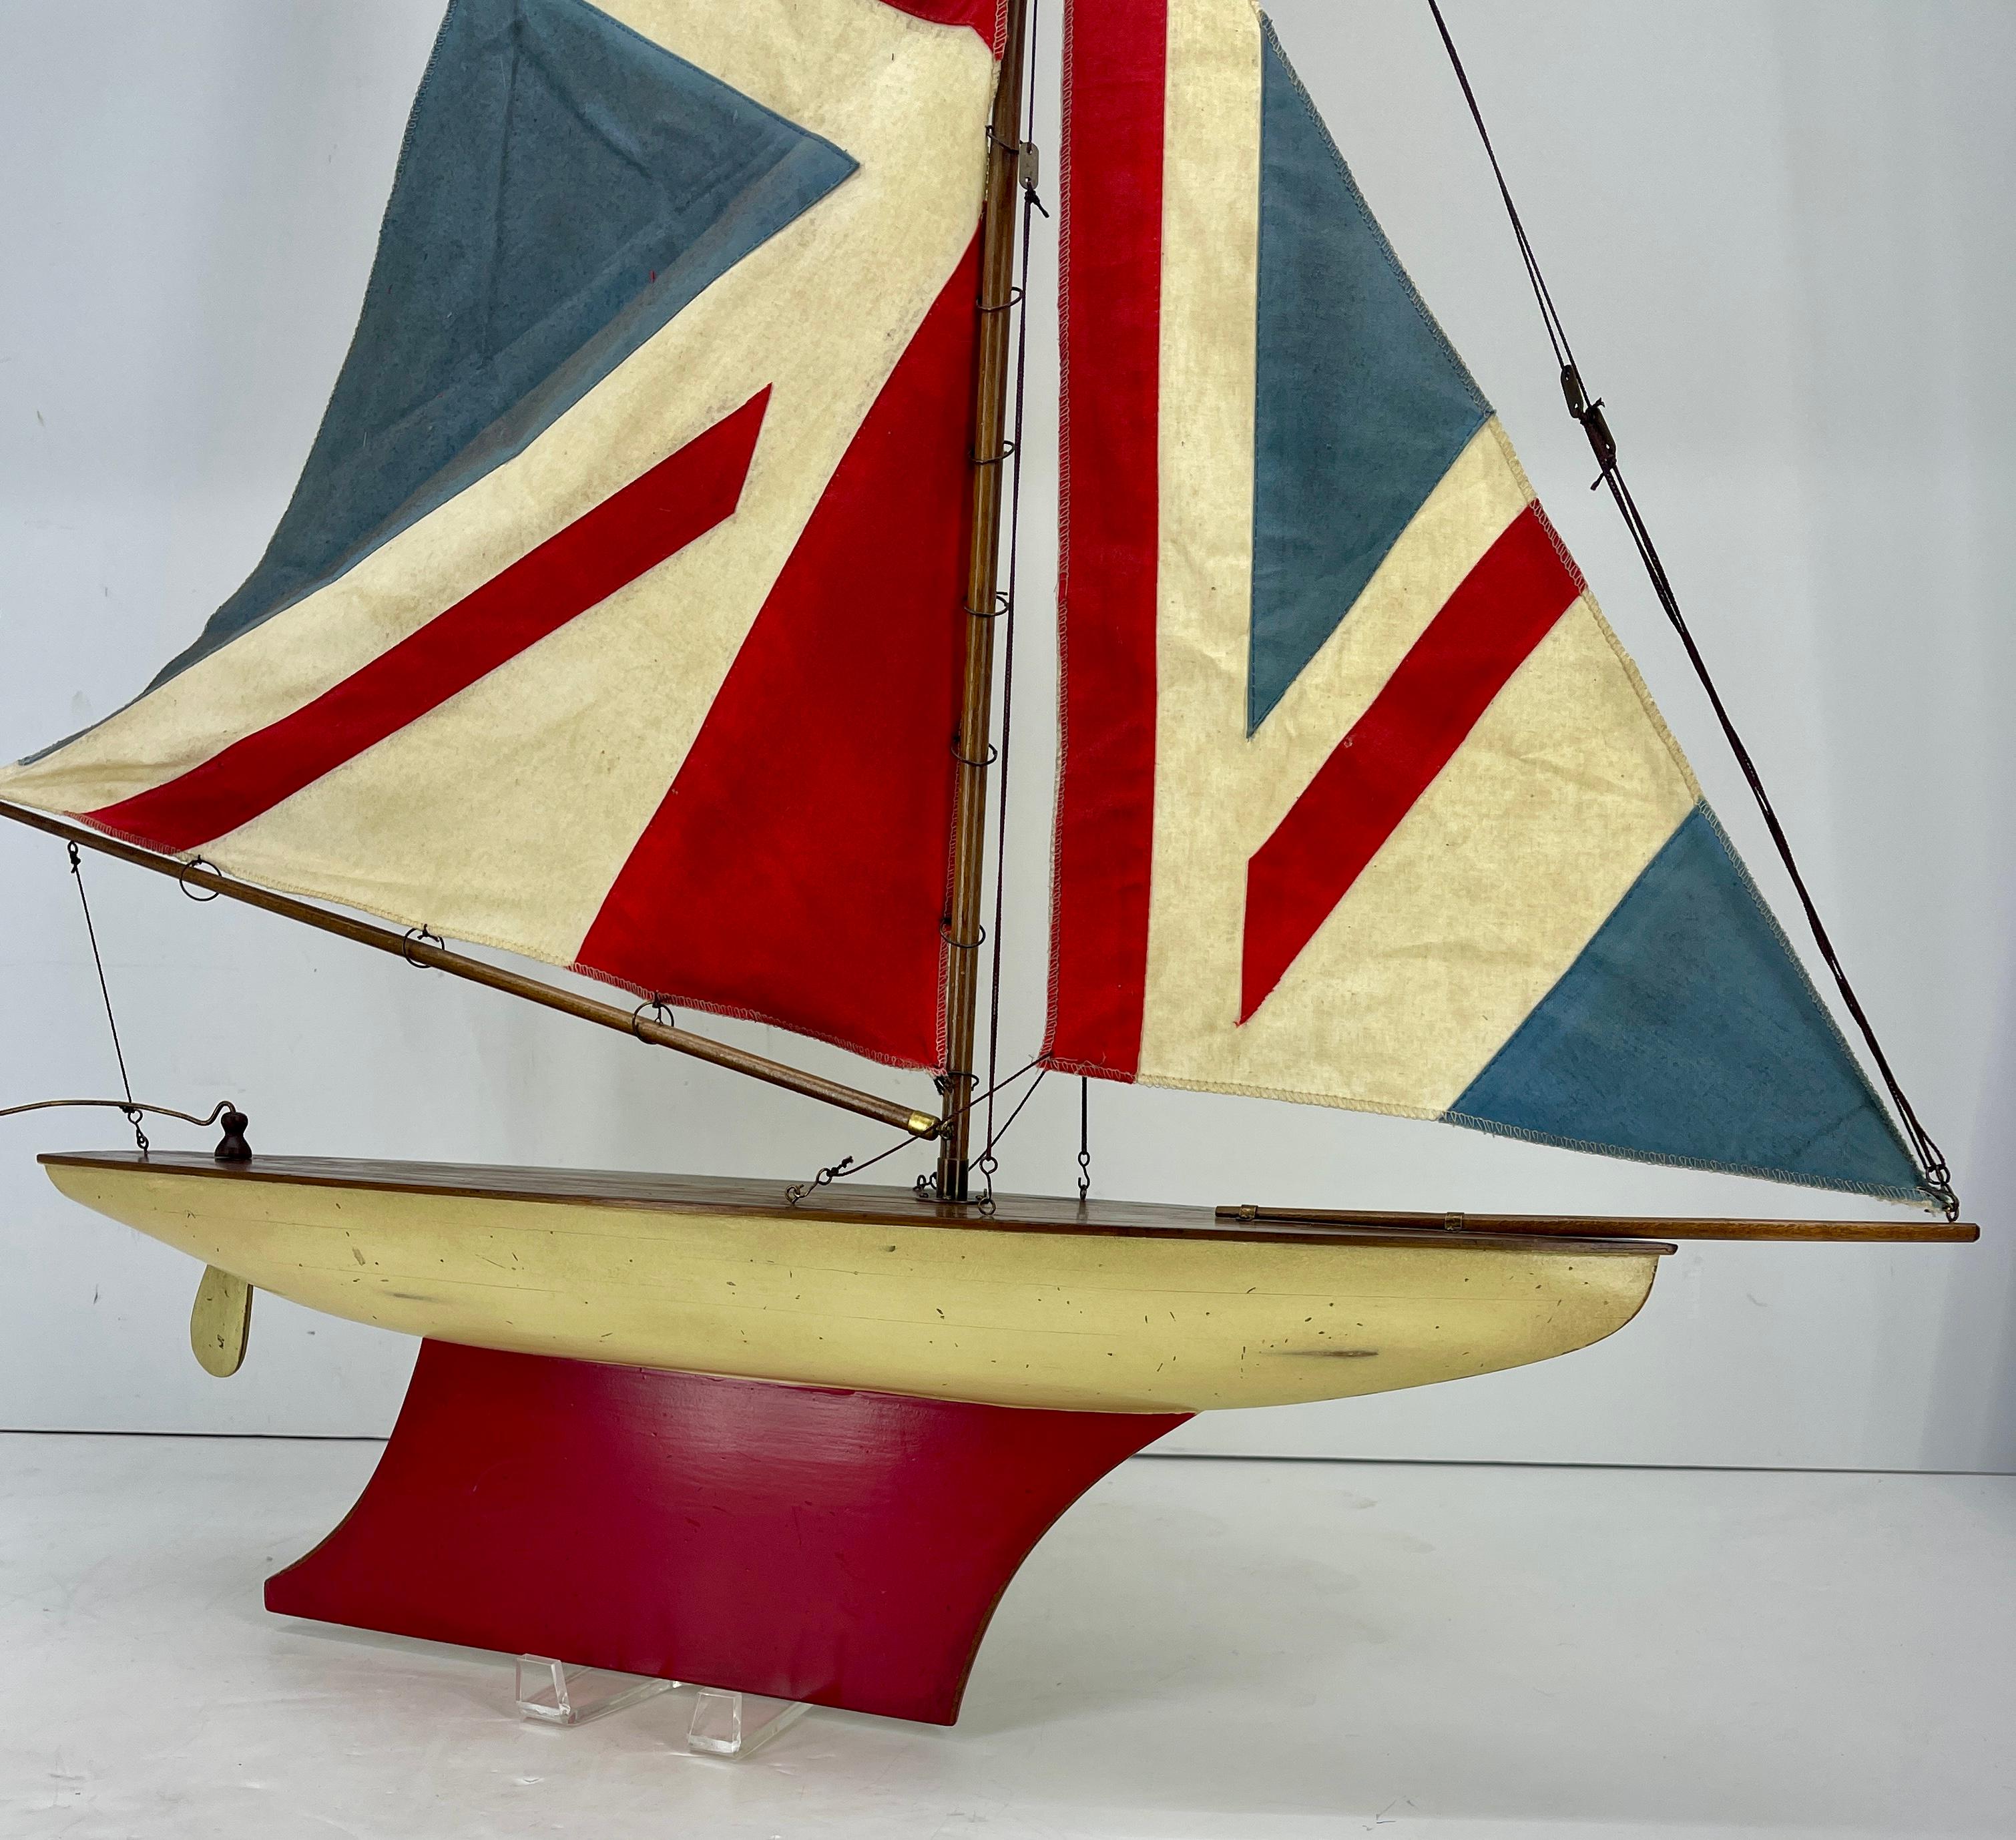 Folk Art English Carved Wood Sailboat Model with Parquetry Deck and Union Jack Sailcloth